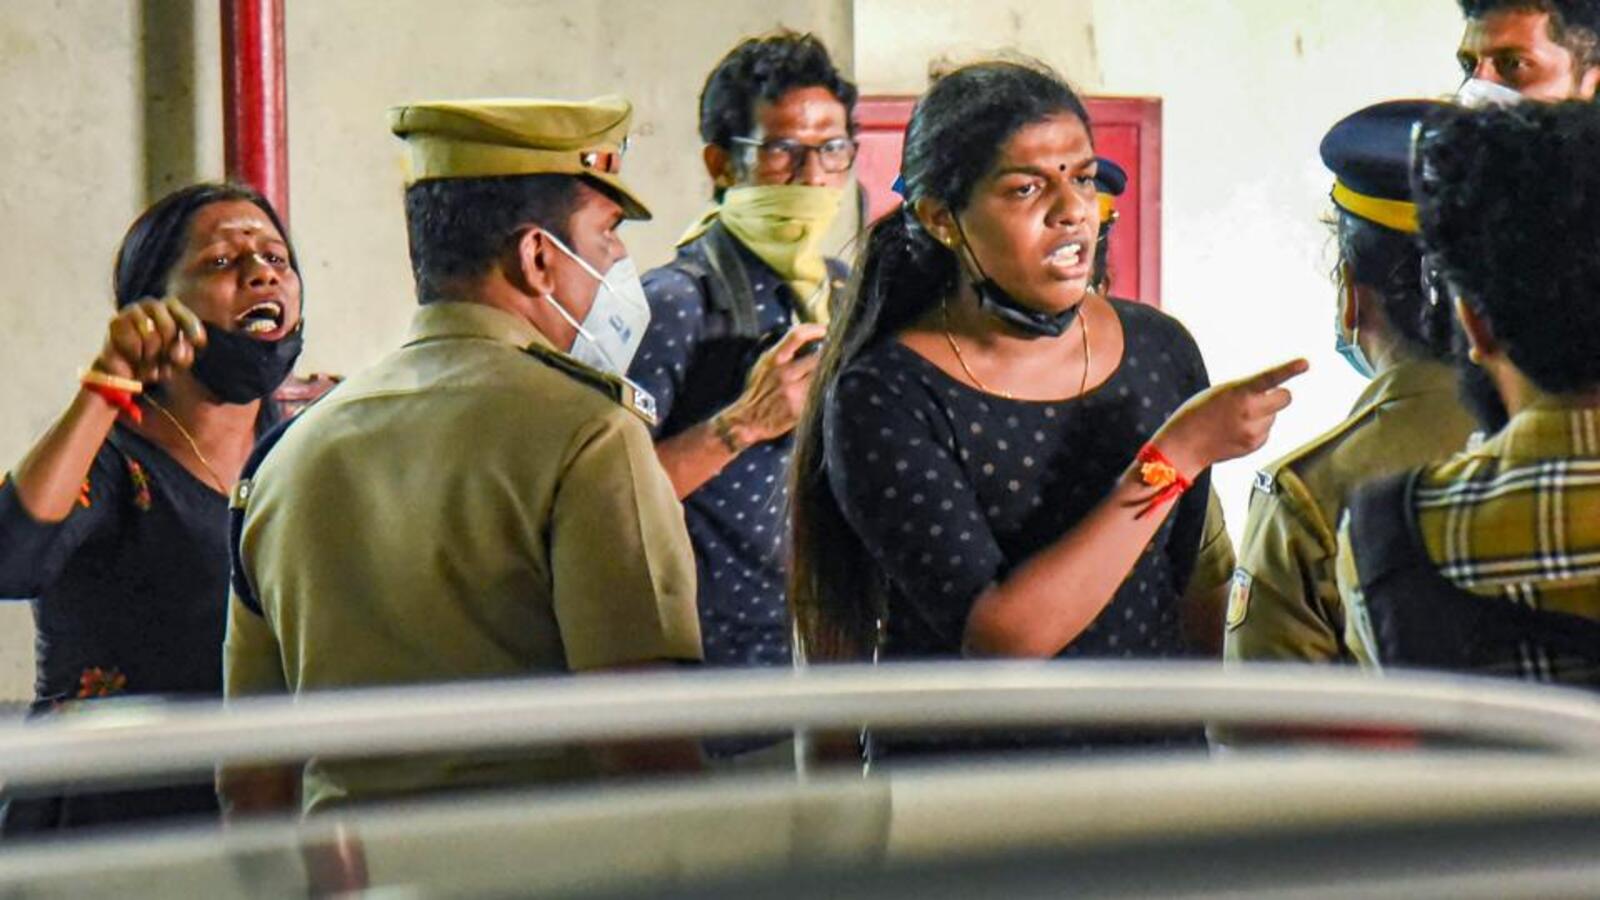 Kerala: Restriction on black face mask, dress triggers row | Latest News  India - Hindustan Times